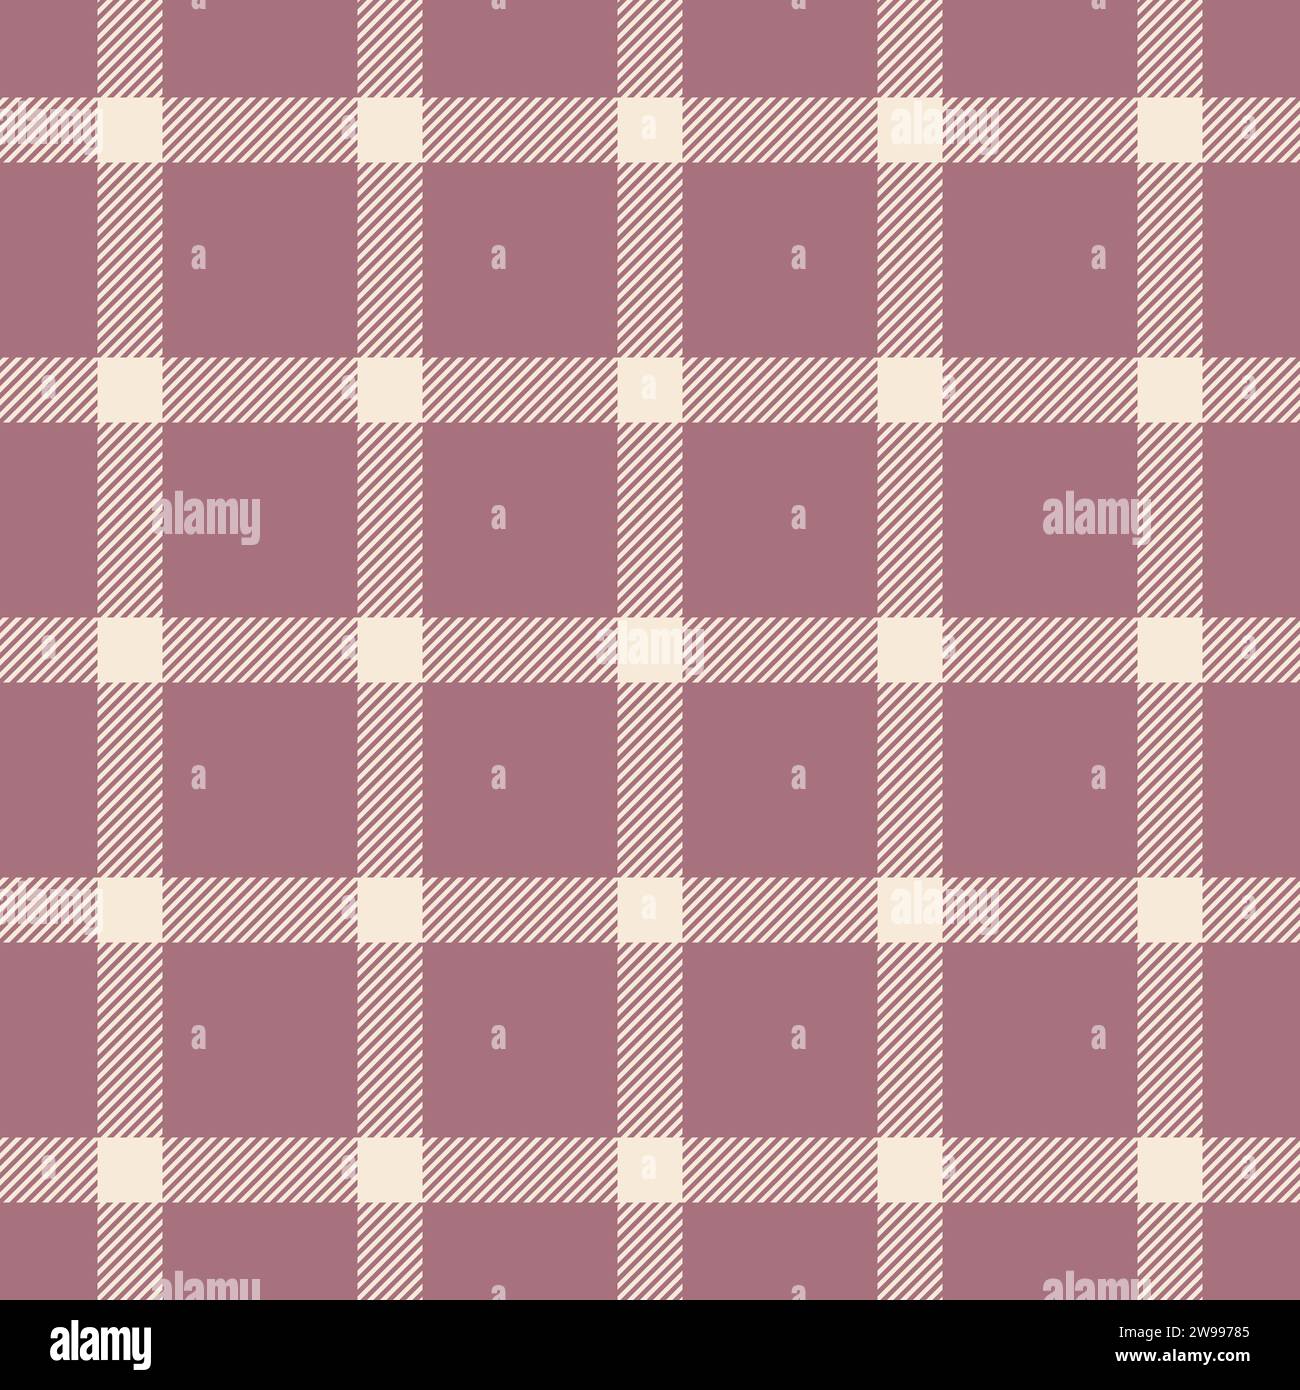 Cross fabric pattern background, velvet plaid texture check. Golf tartan seamless vector textile in red and antique white color. Stock Vector